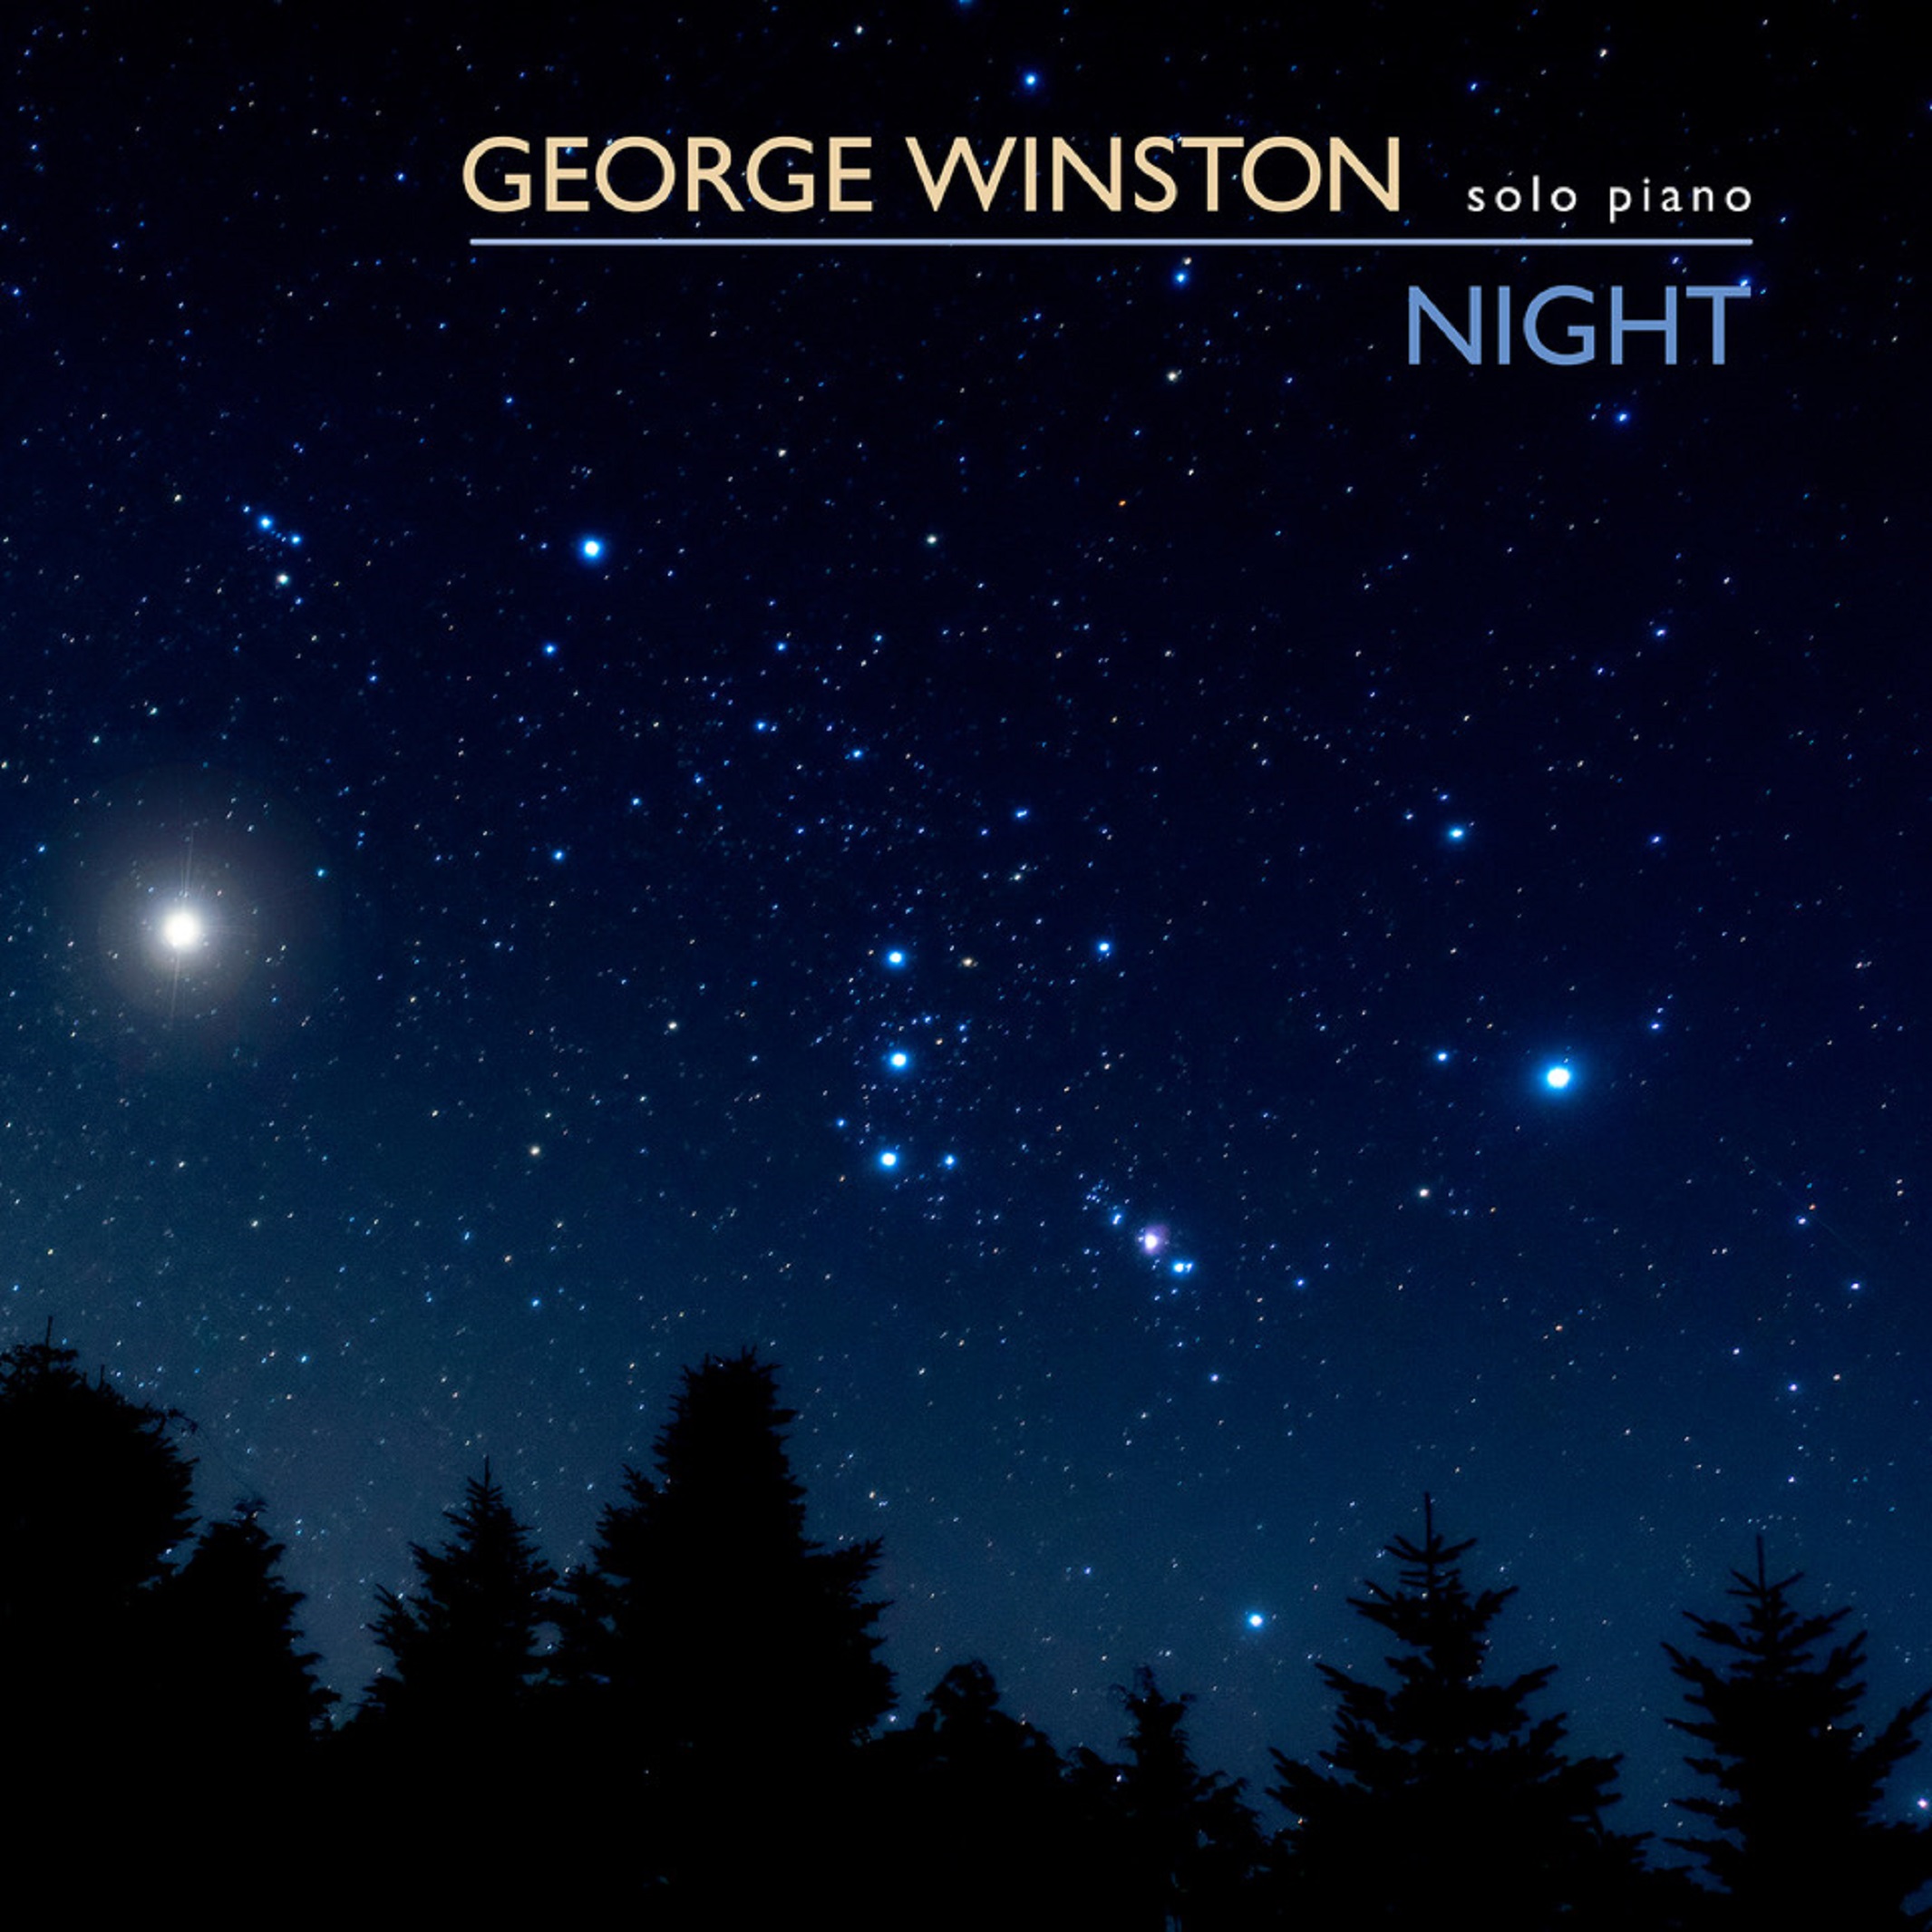 Acclaimed Pianist George Winston Set to Release New Album "NIGHT" on May 6, 2022